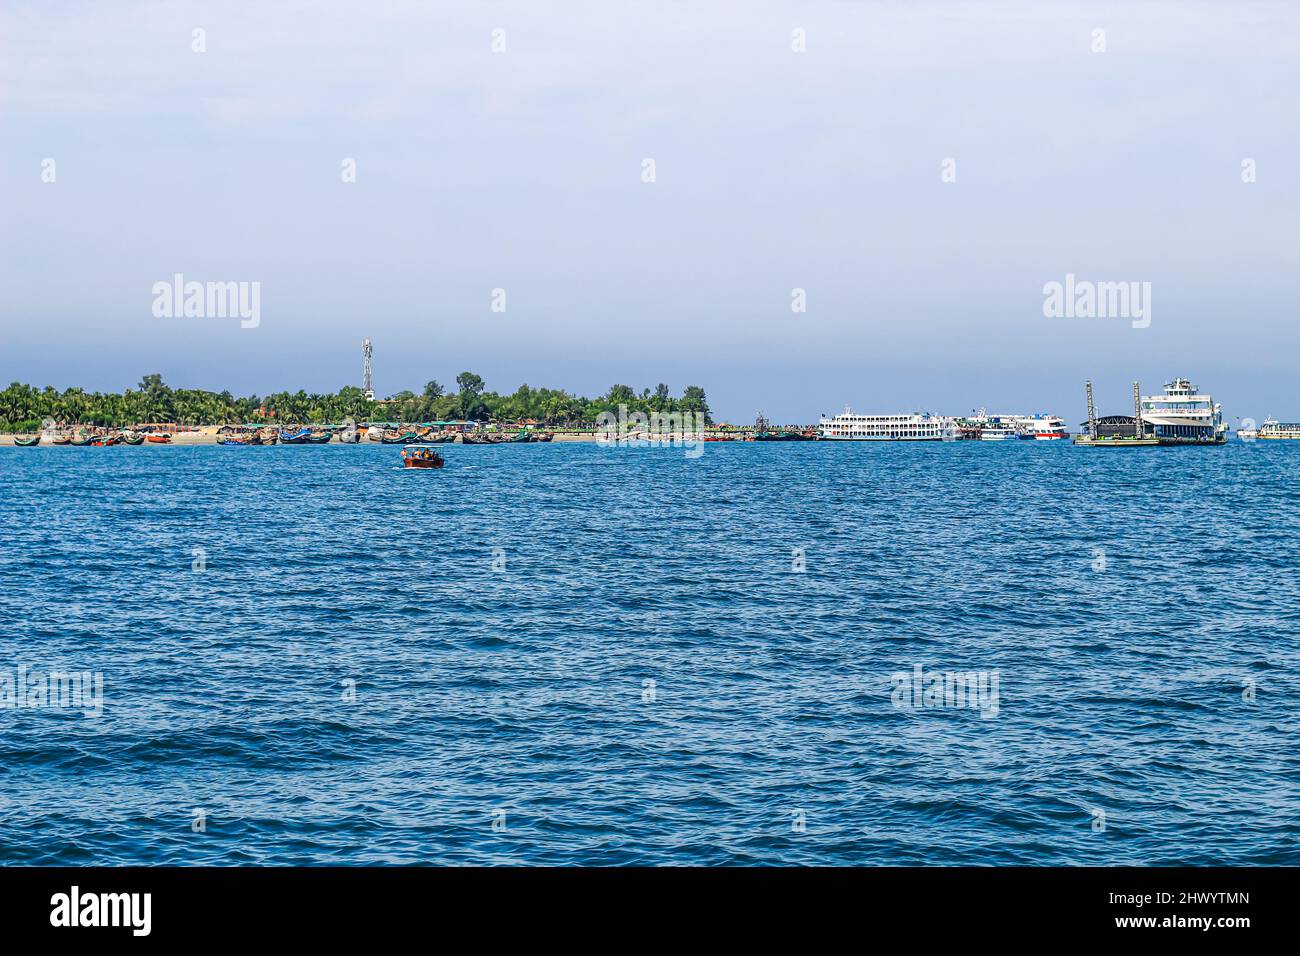 Tourist jetty of St. Martin's Island, Bangladesh. Photo of a seaport on an island with many ships docked. Good to use for outdoor. Stock Photo